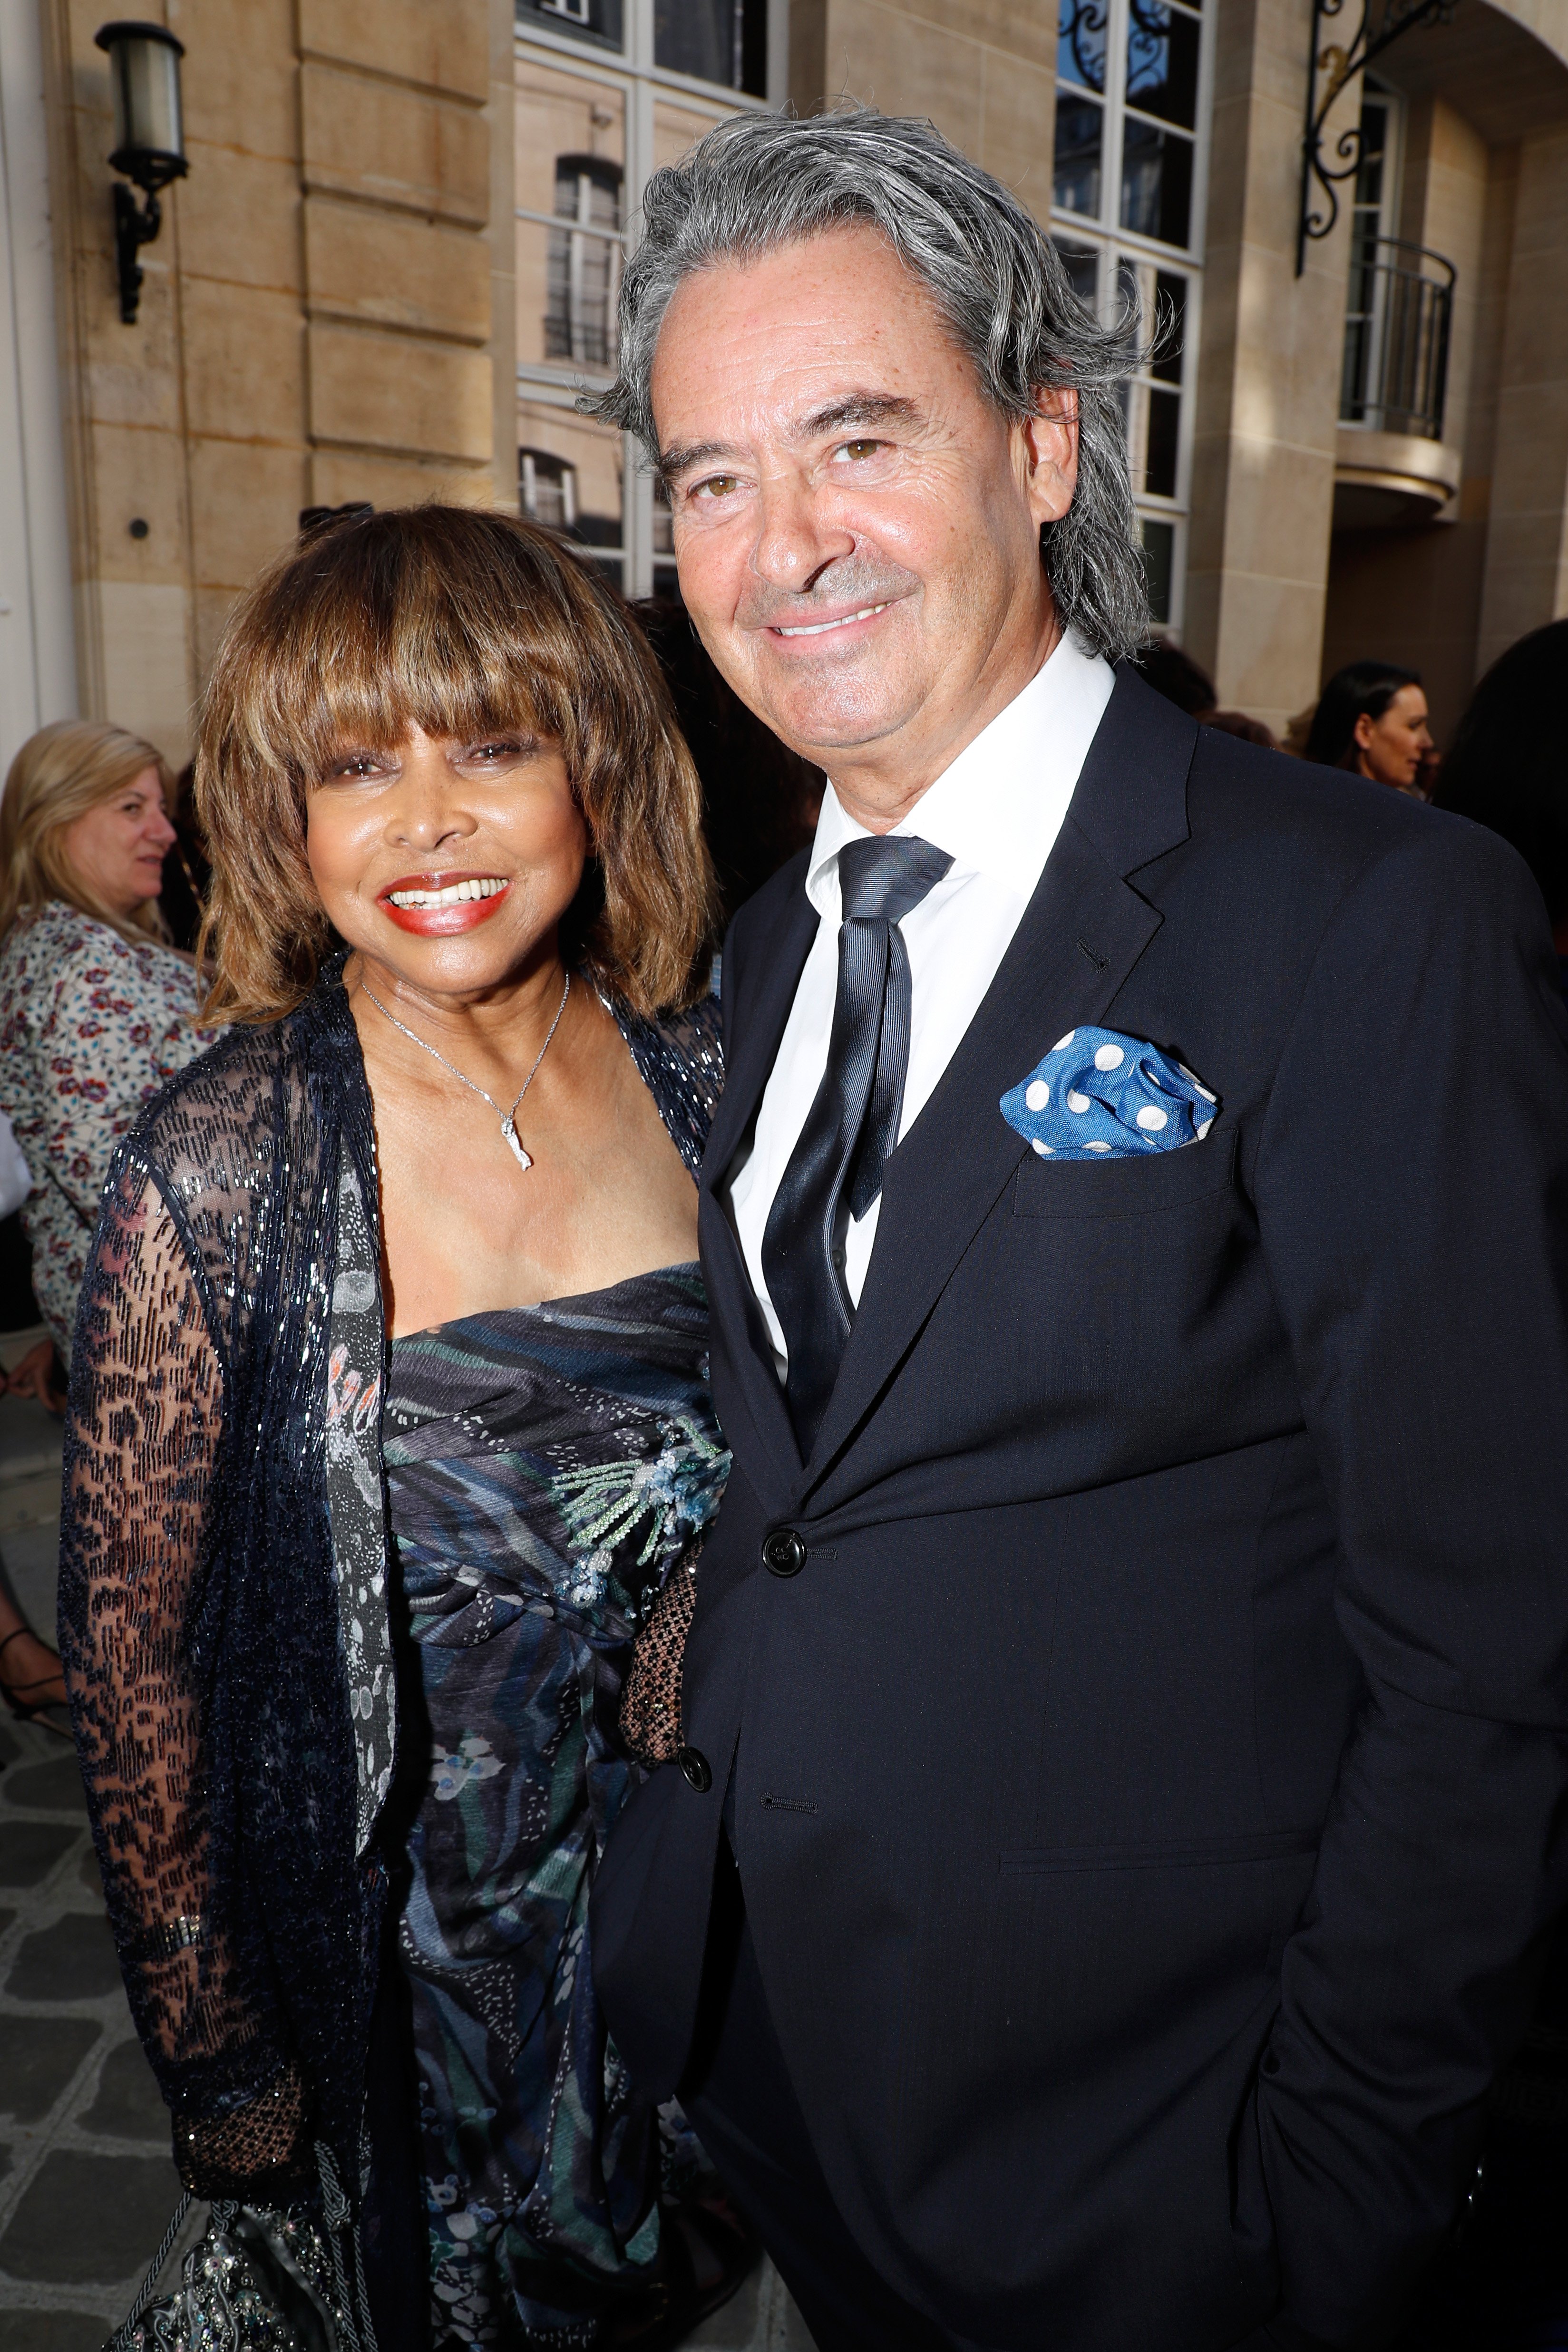 Tina Turner and her husband Erwin Bach in Paris, France 2018. | Source: Getty Images 